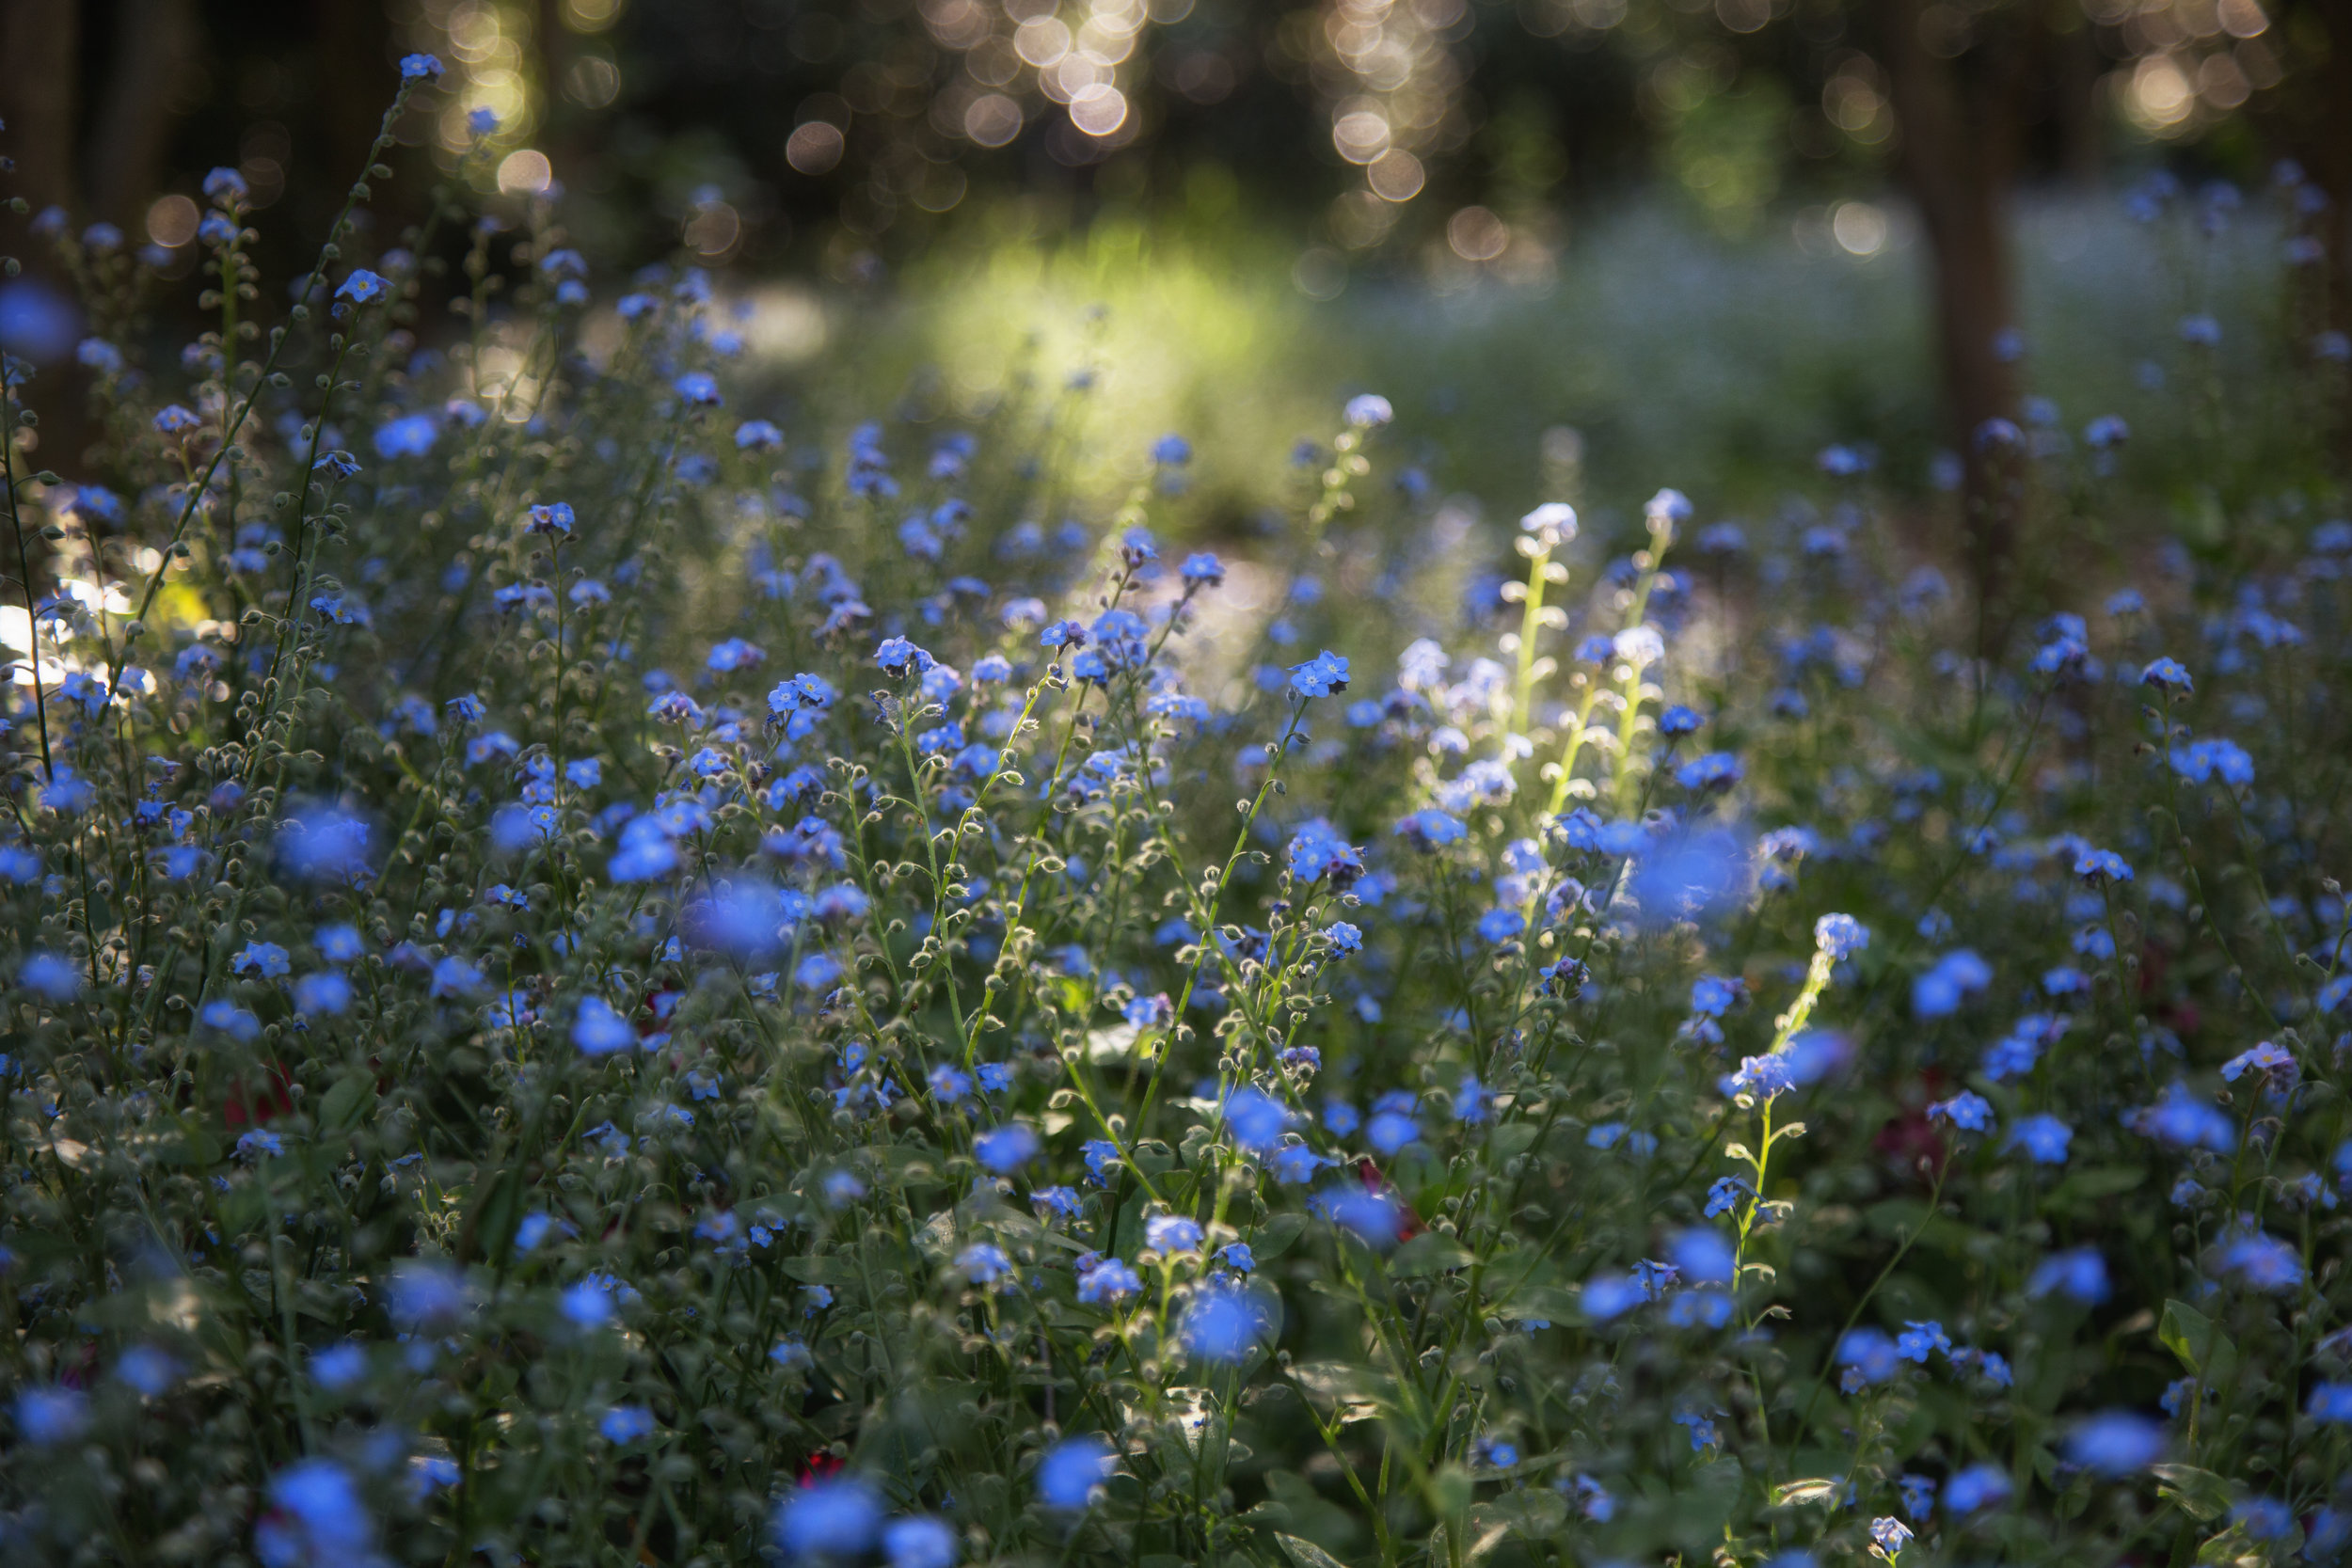 spending-time-in-a-field-of-forget-me-nots_26443697851_o.jpg